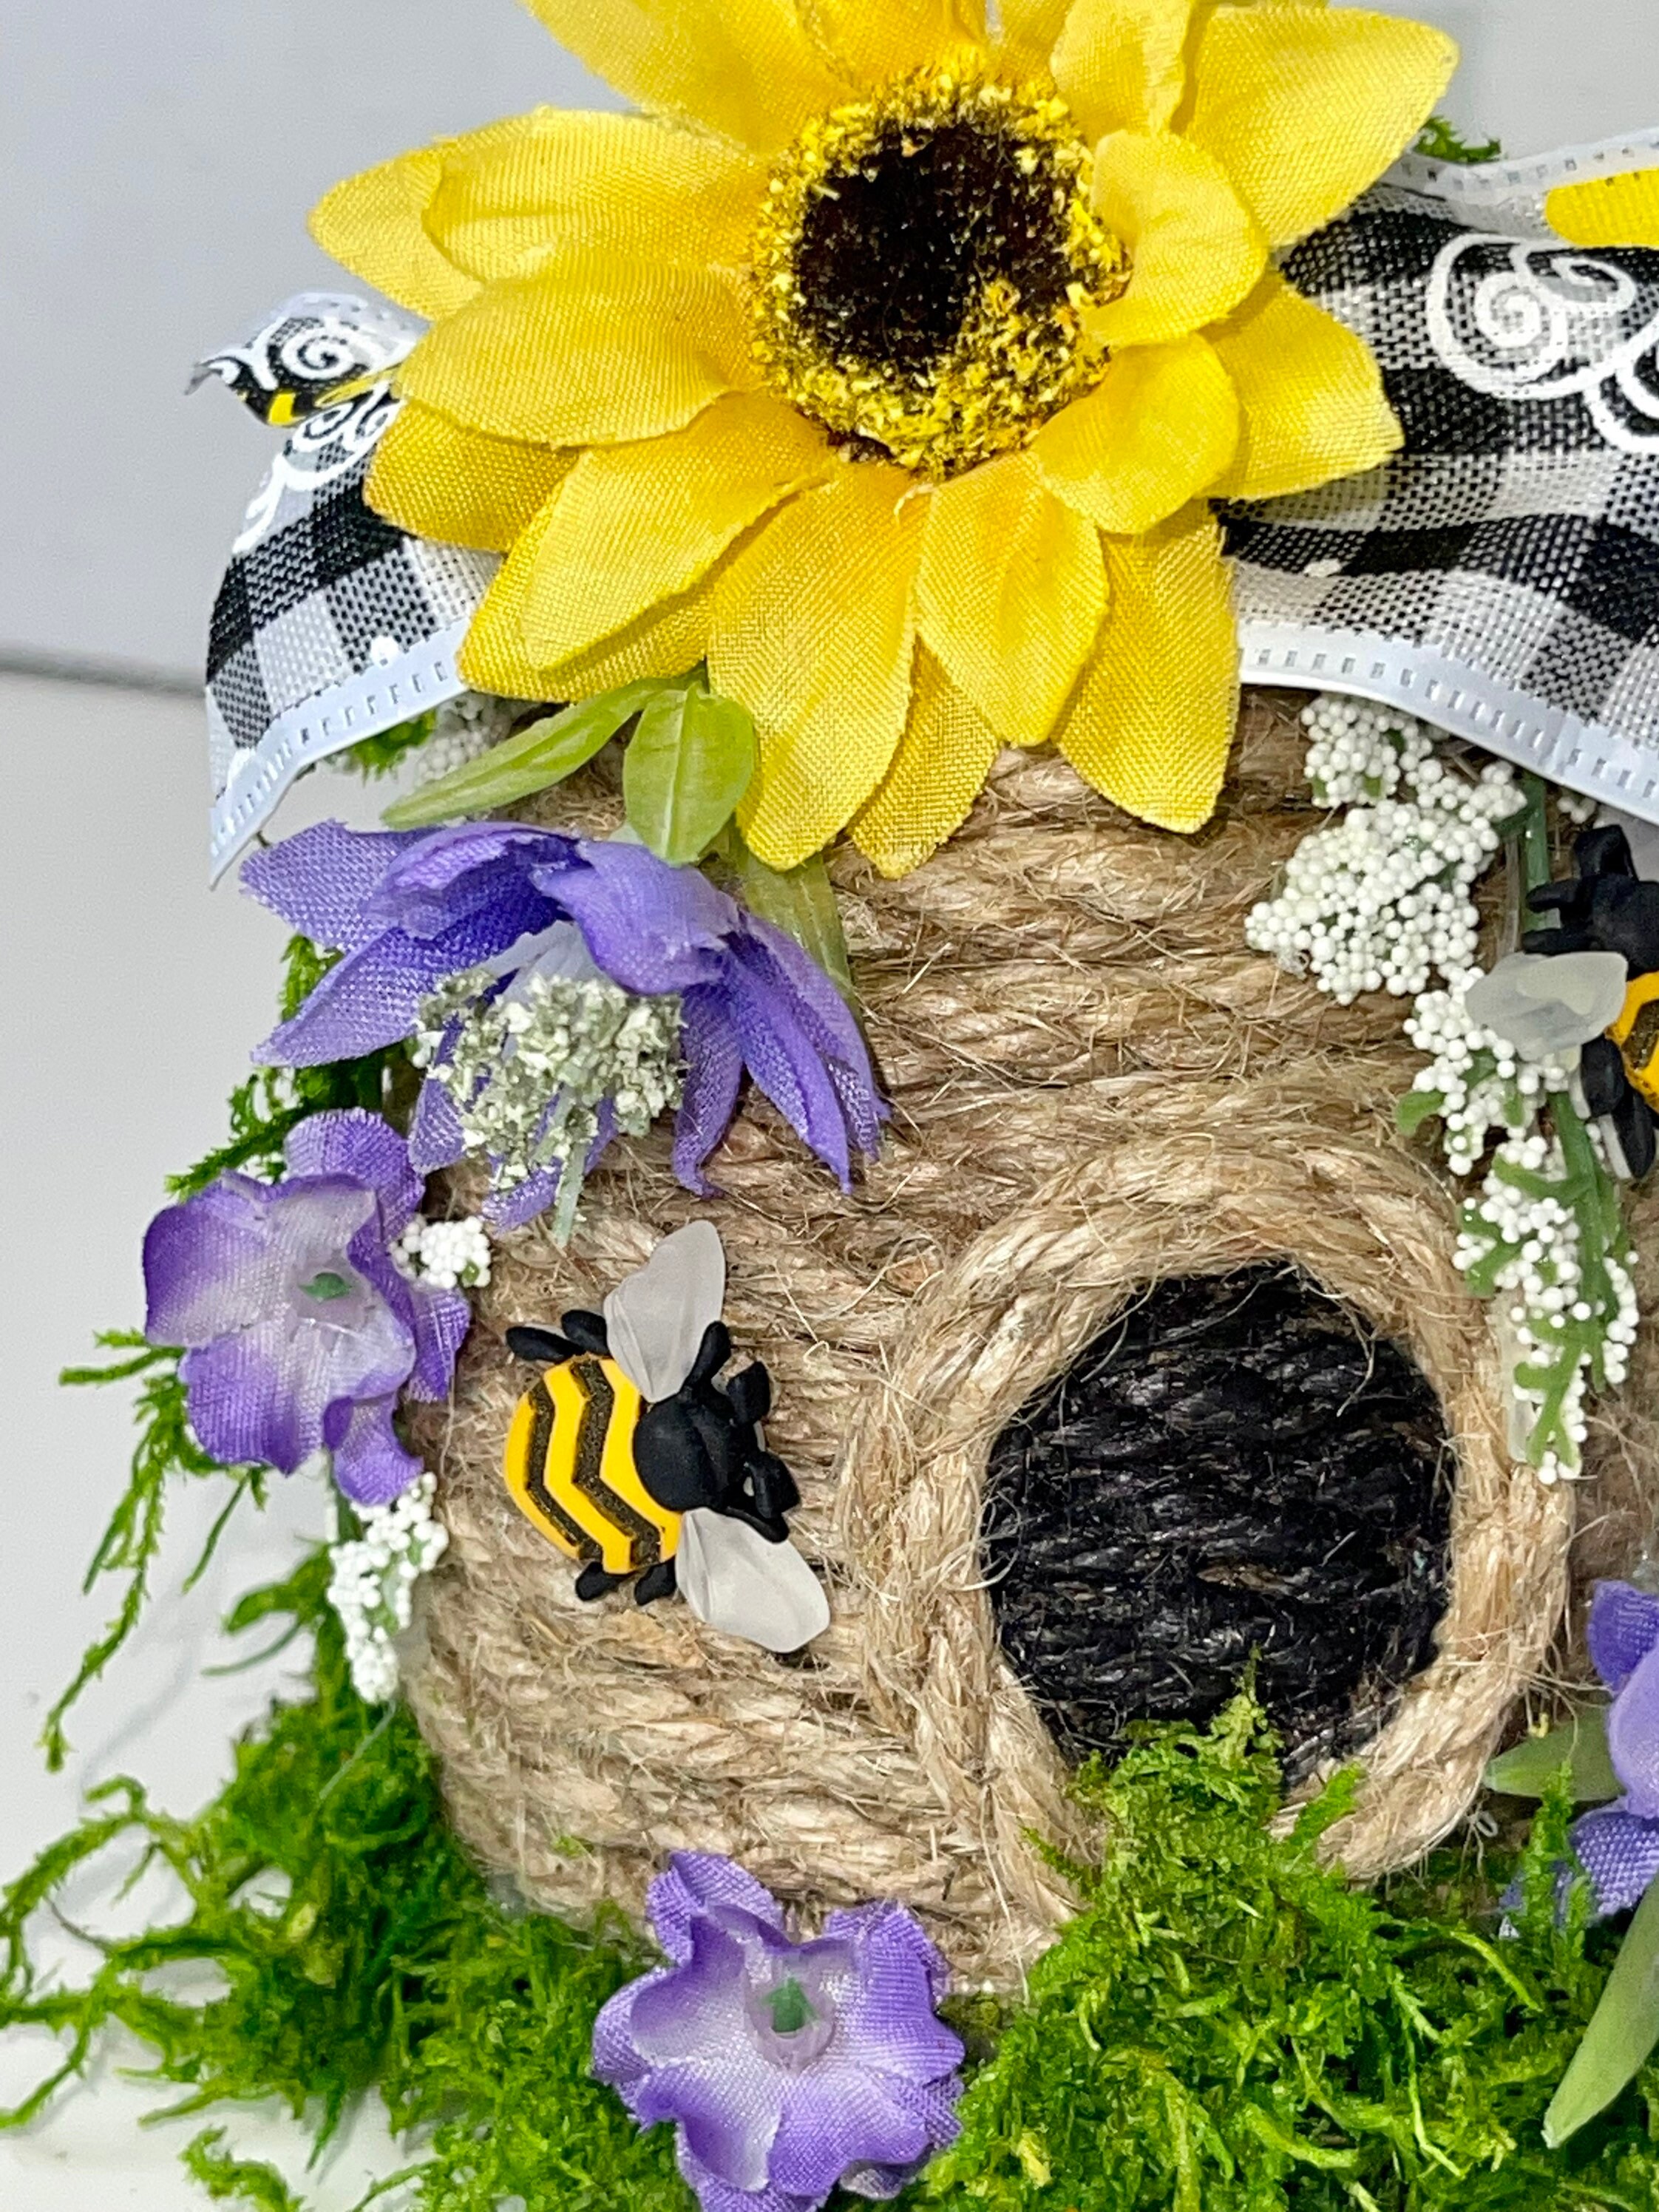 Cute Bee Skep / Hive Bee Decor Bumble Bees Handmade With Clay With Flowers  and Cute Baby Bees 